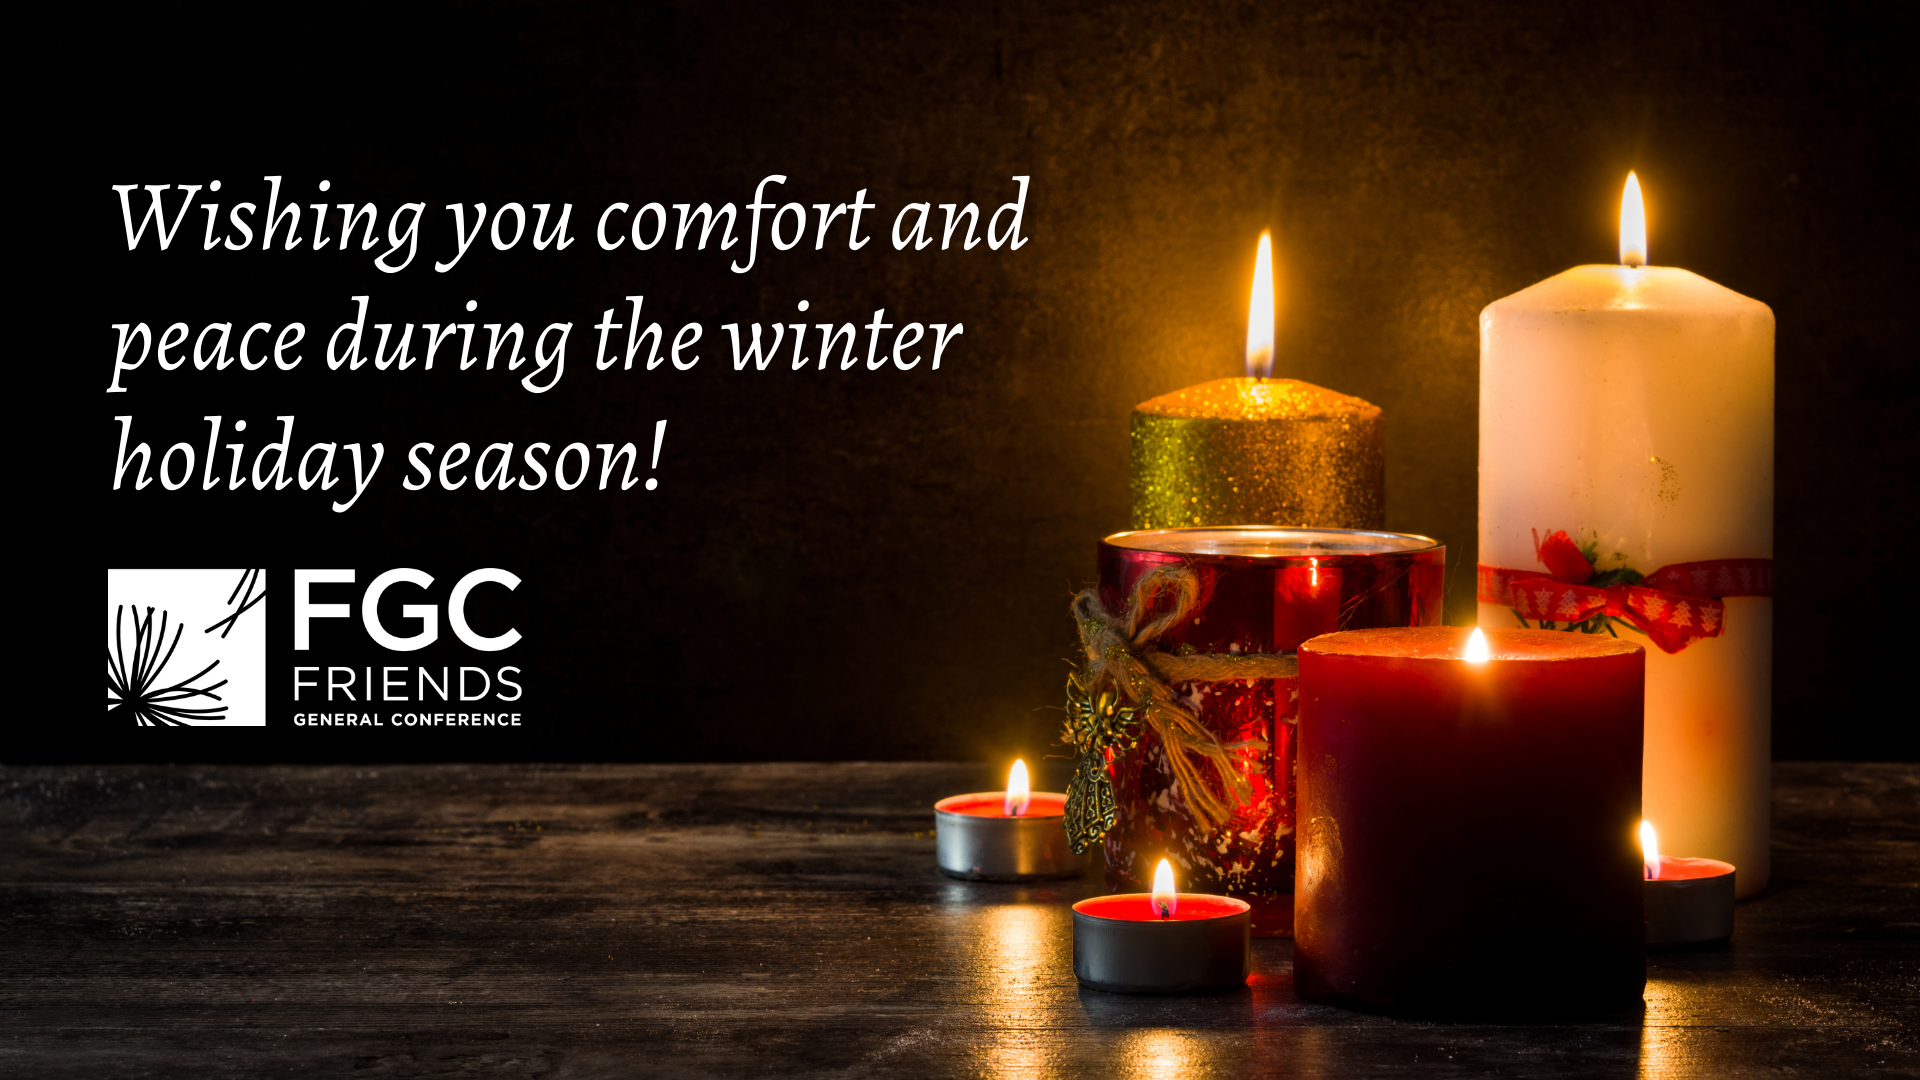 On a table top in a darkened room, several lit candles of various sizes, colors, and adornments light up the space. Next to the candles are the words: "Wishing you comfort and peace during the winter holiday season!" Beneath the words is the FGC logo. 